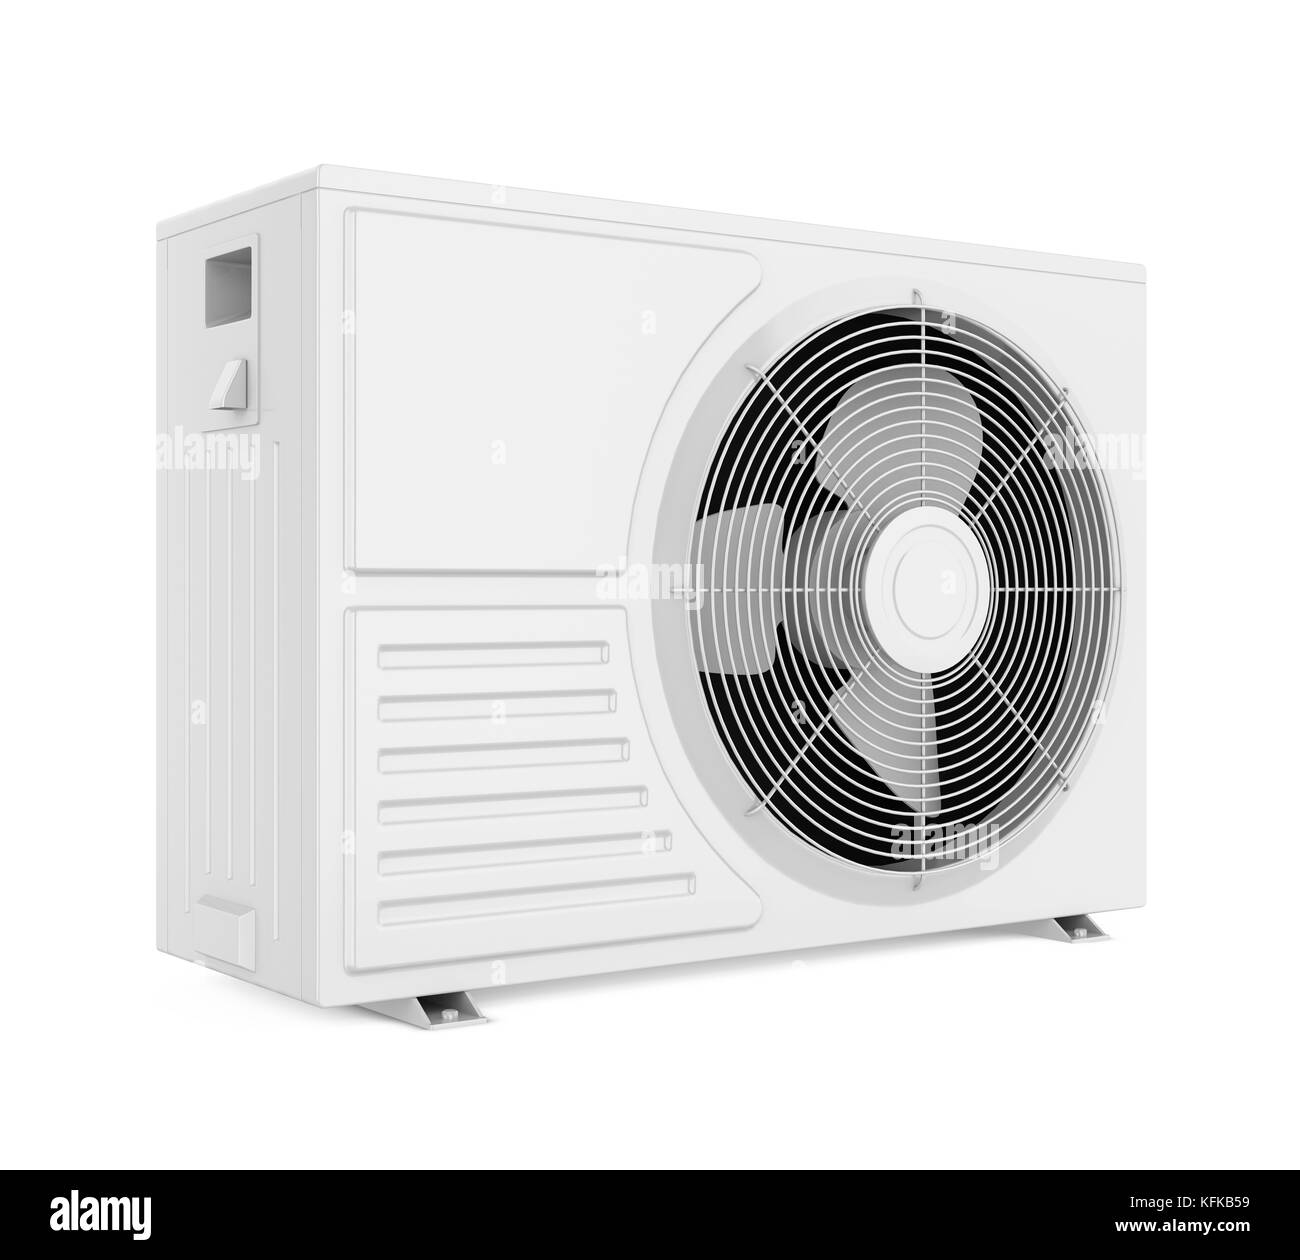 Air Conditioner Outdoor Unit Isolated Stock Photo